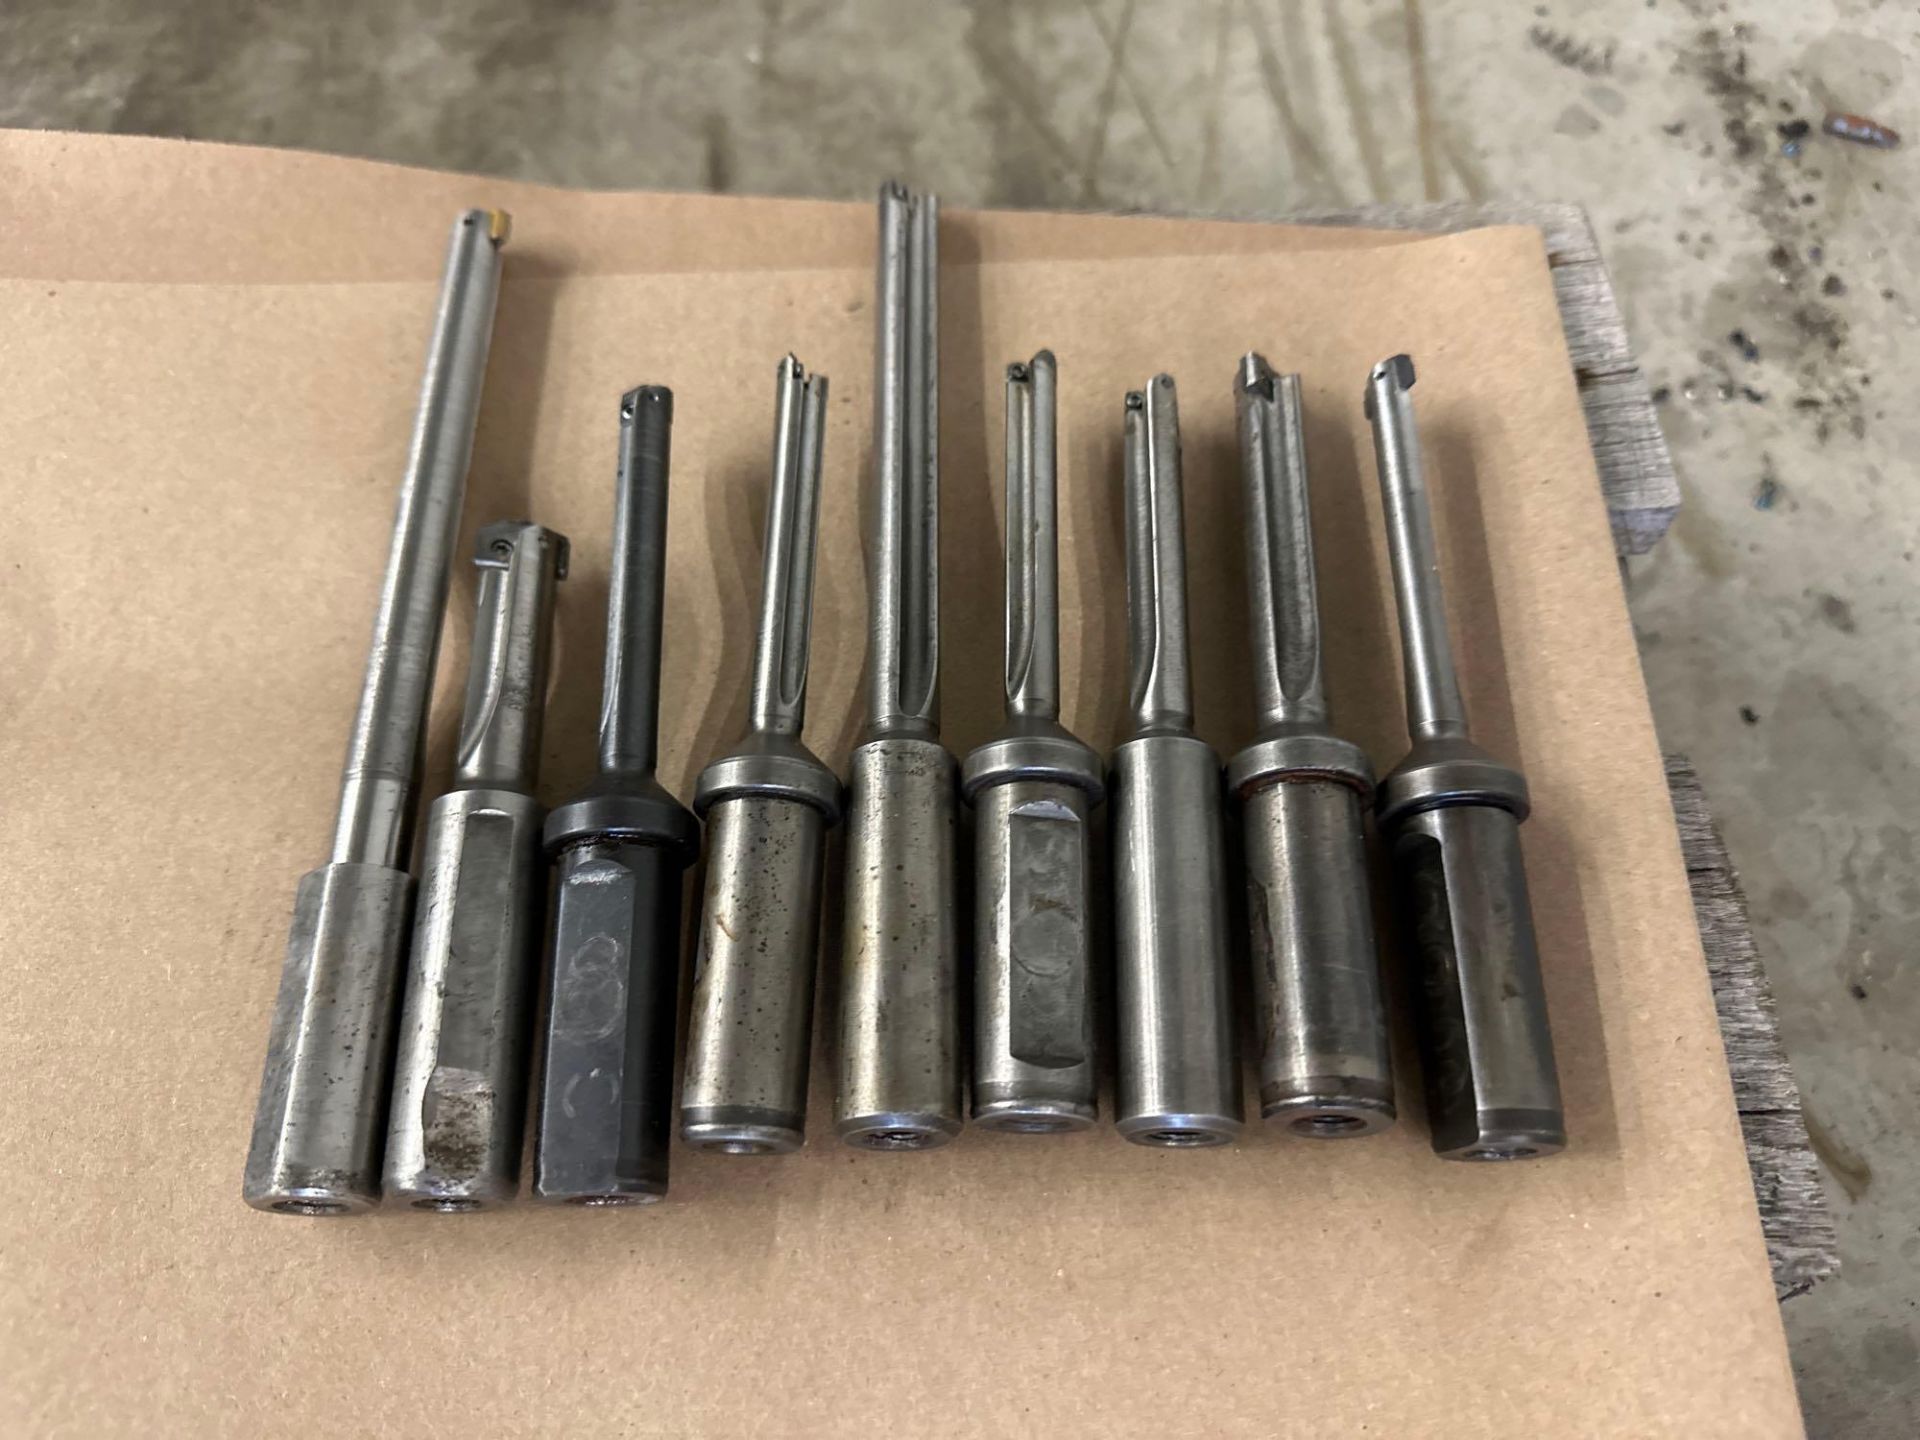 Lot of 9 Assorted Spade Insert Boring Bars Size Ranging From: 3/4” X 4 5/8” to 3/4” X 7 3/4”